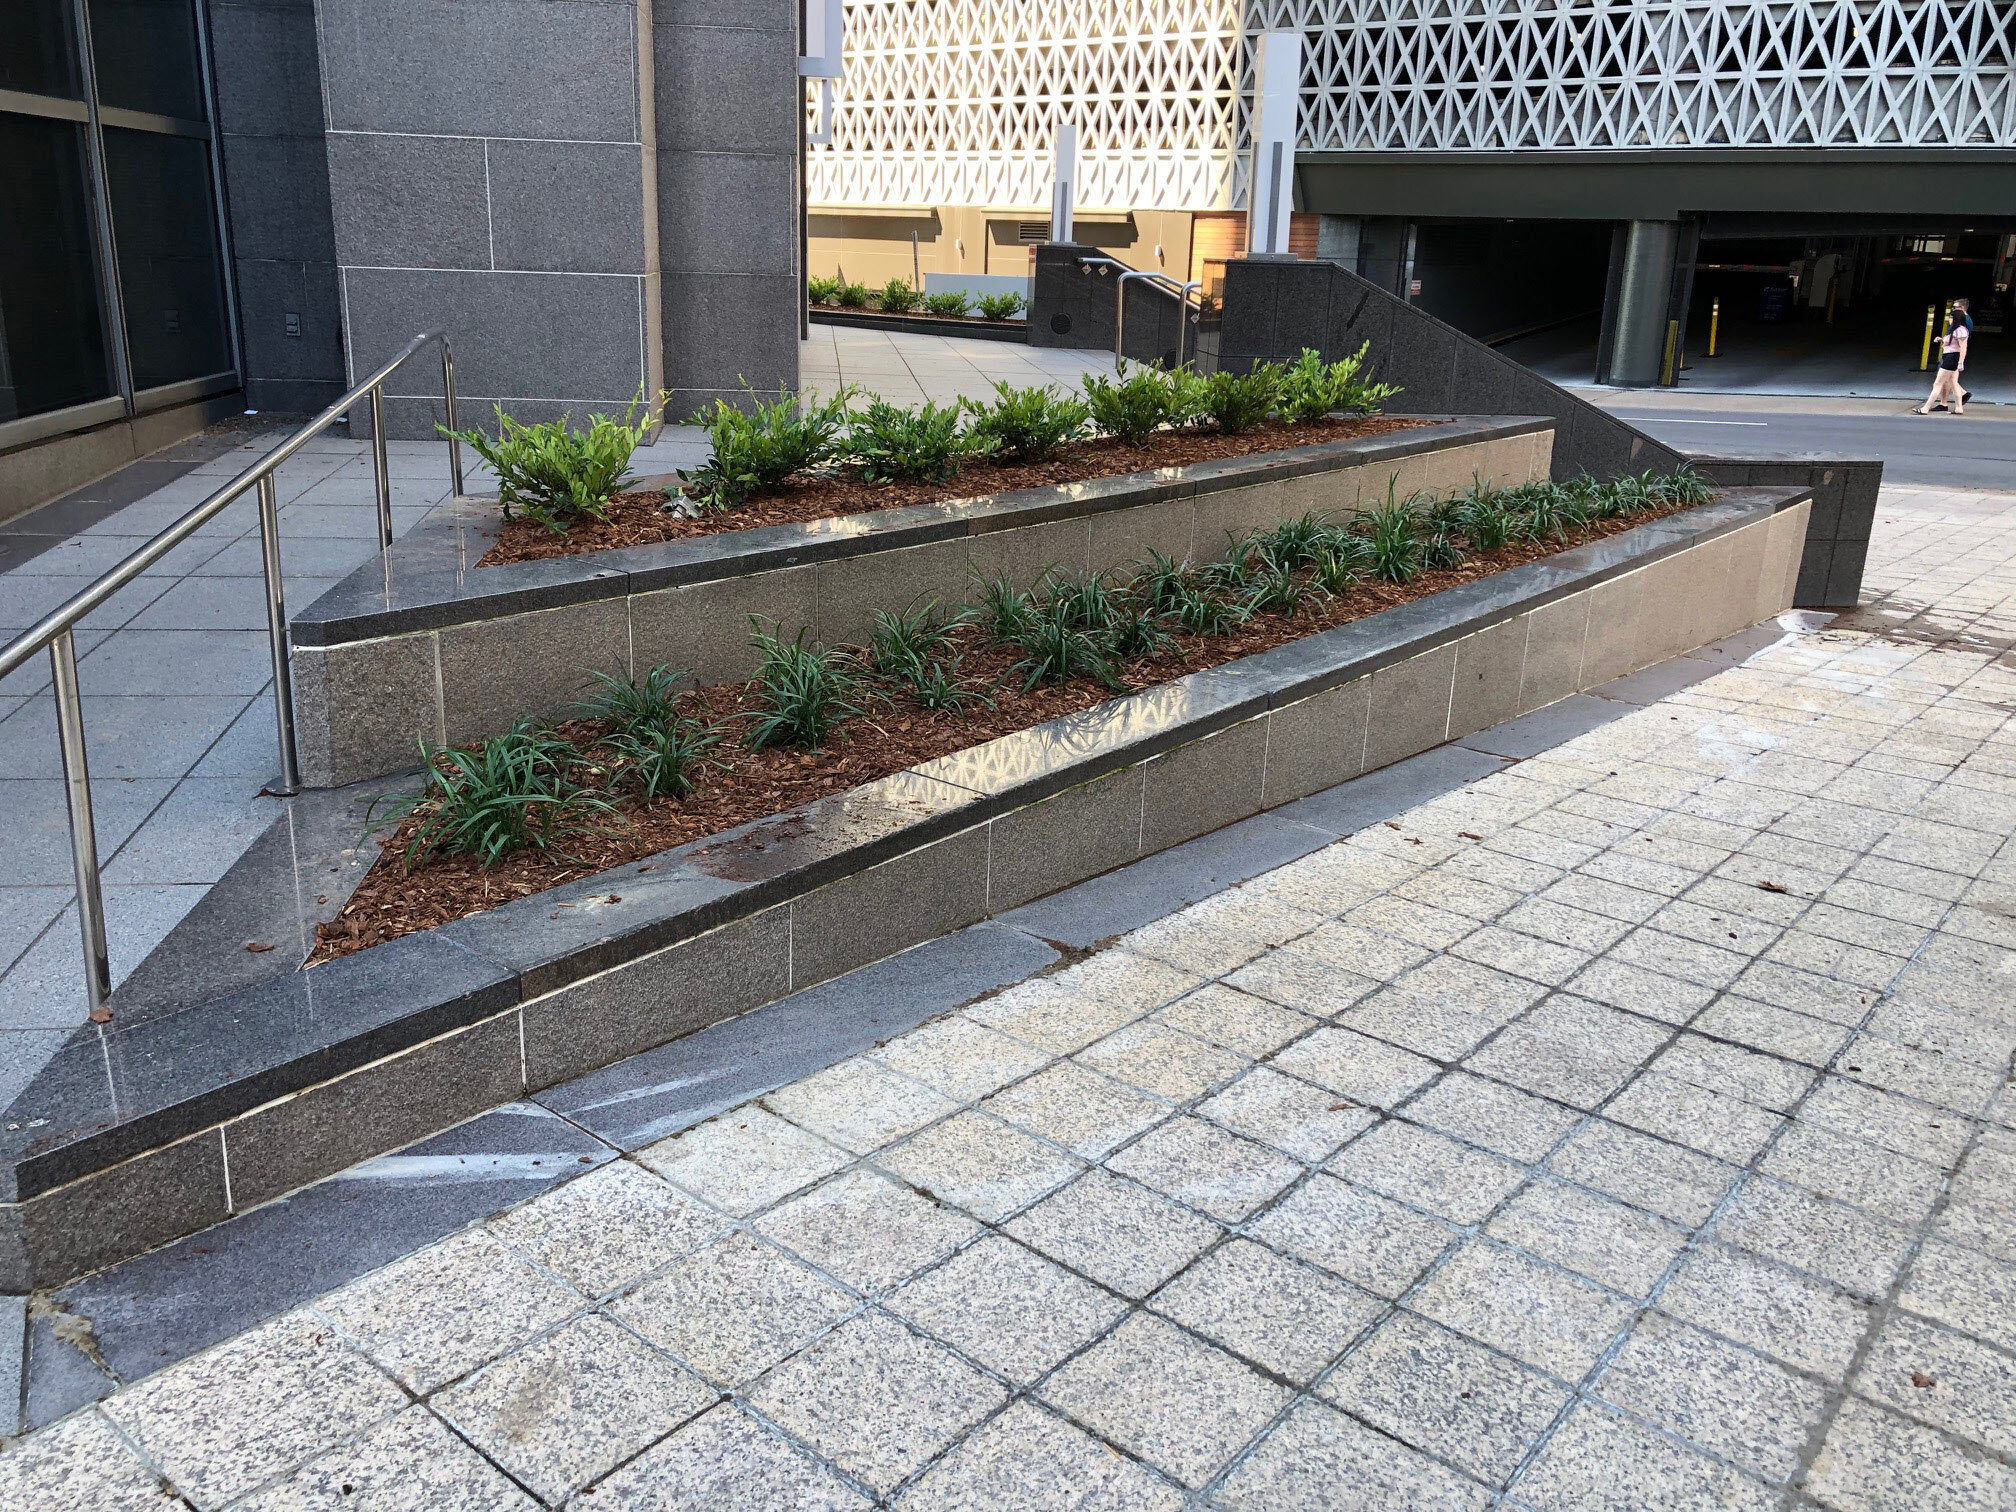  New planters at the main entrance  